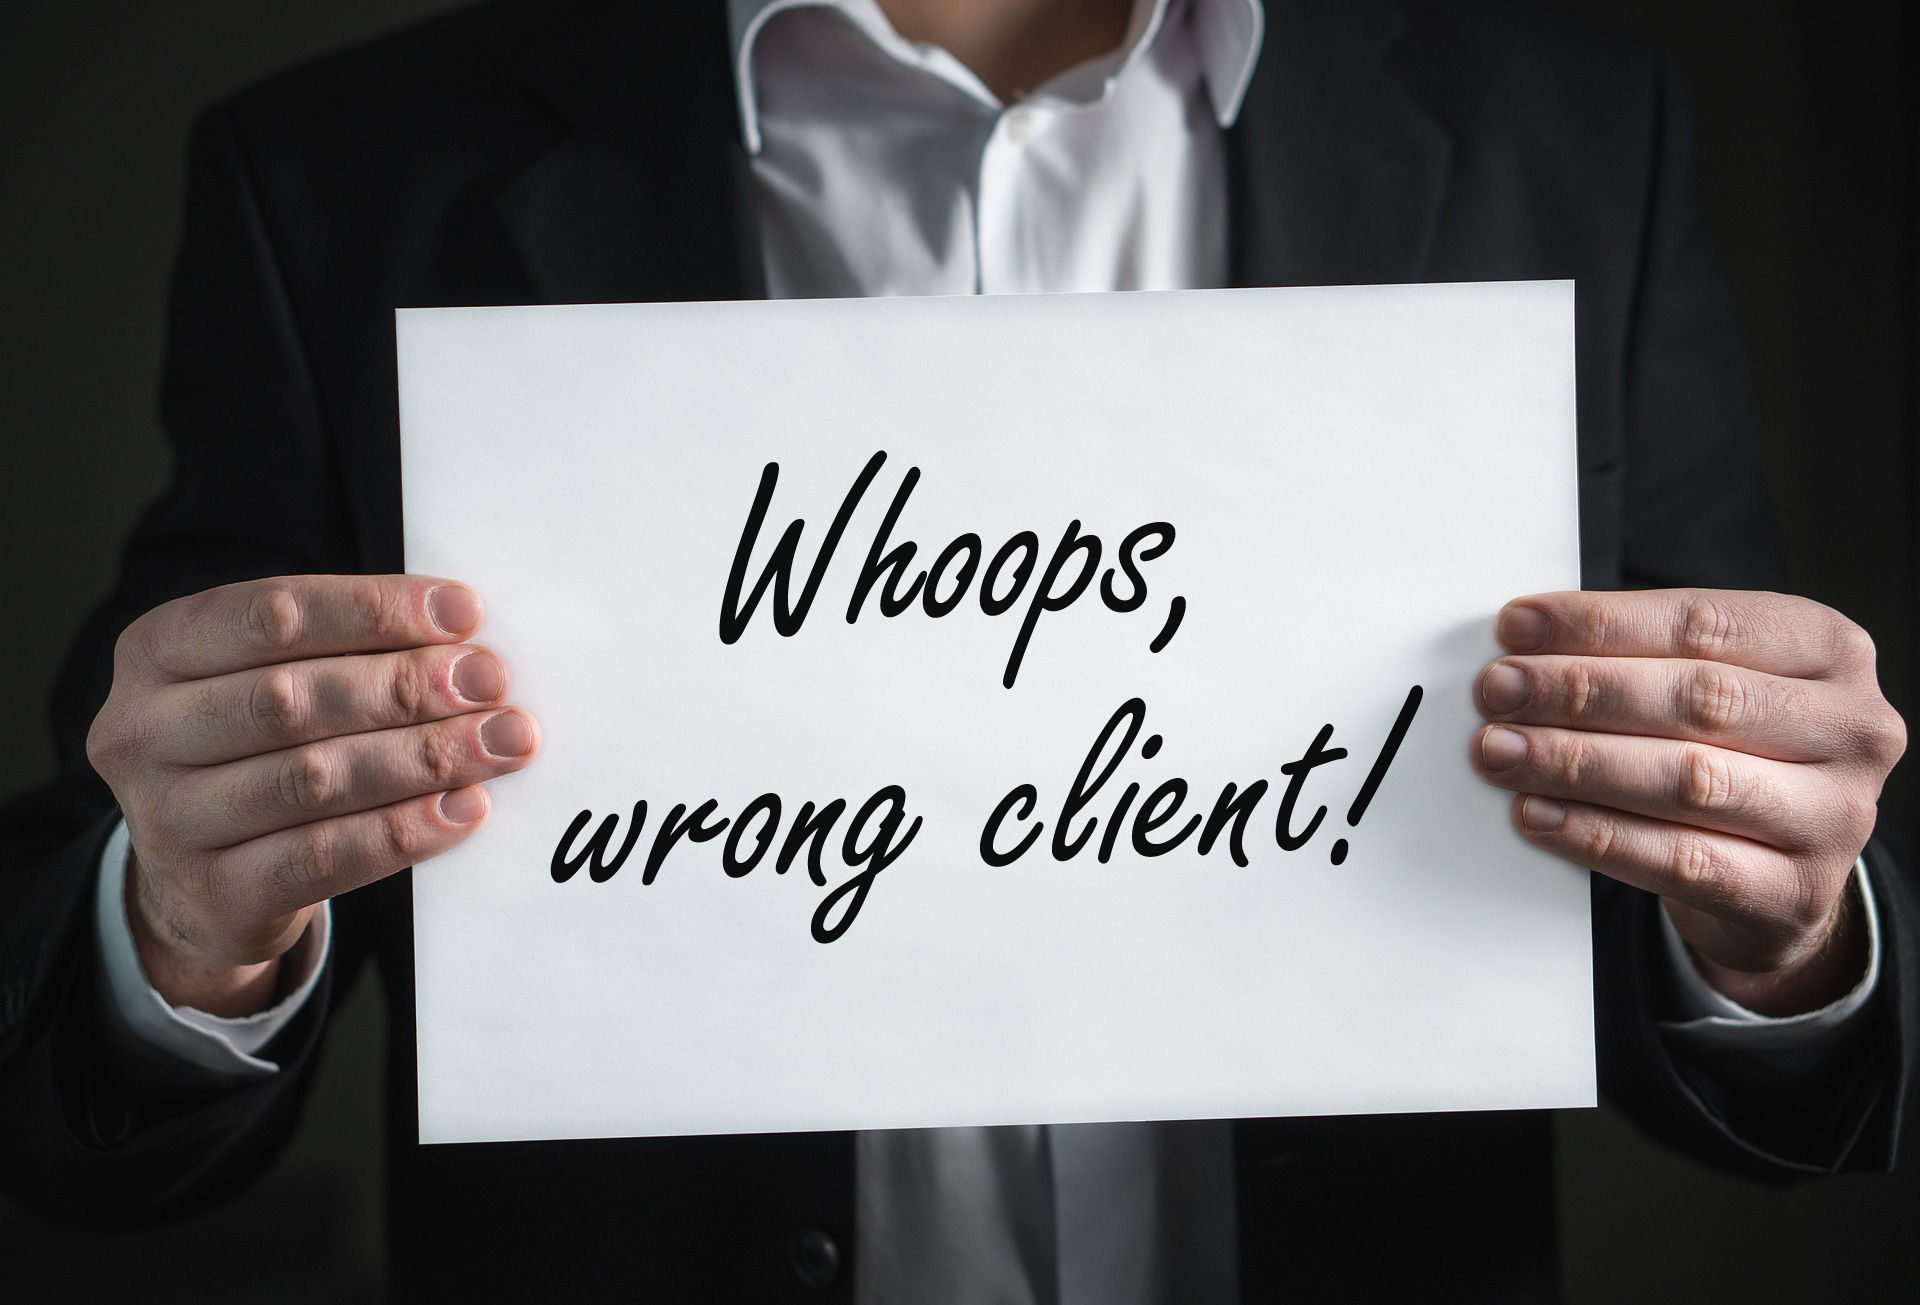 A person holding a sign that says "Whoops, wrong client!"